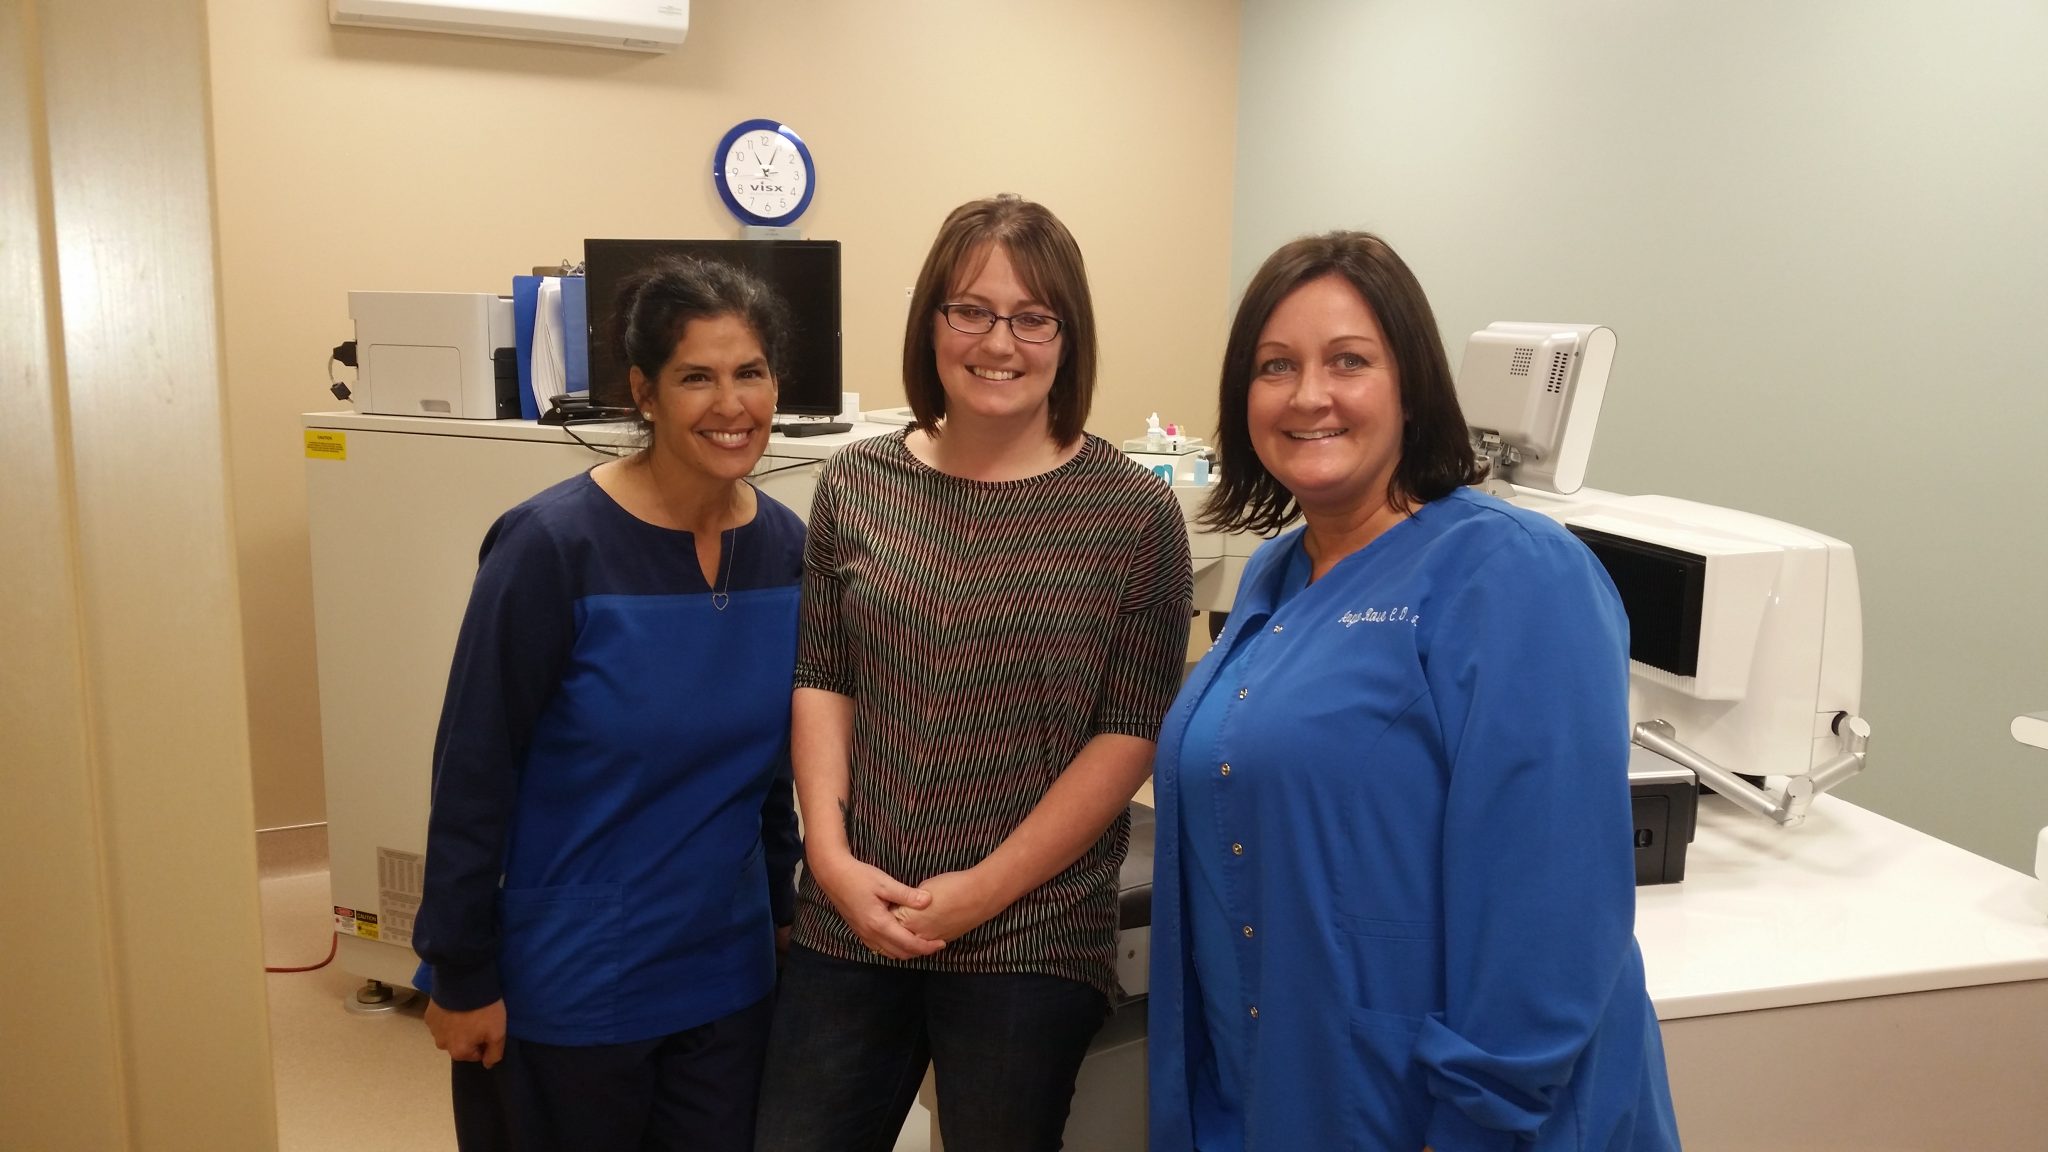 iLASIK patient, April Hopson, with Certified iLASIK technicians (Anna Schuler and Angie Rowe)